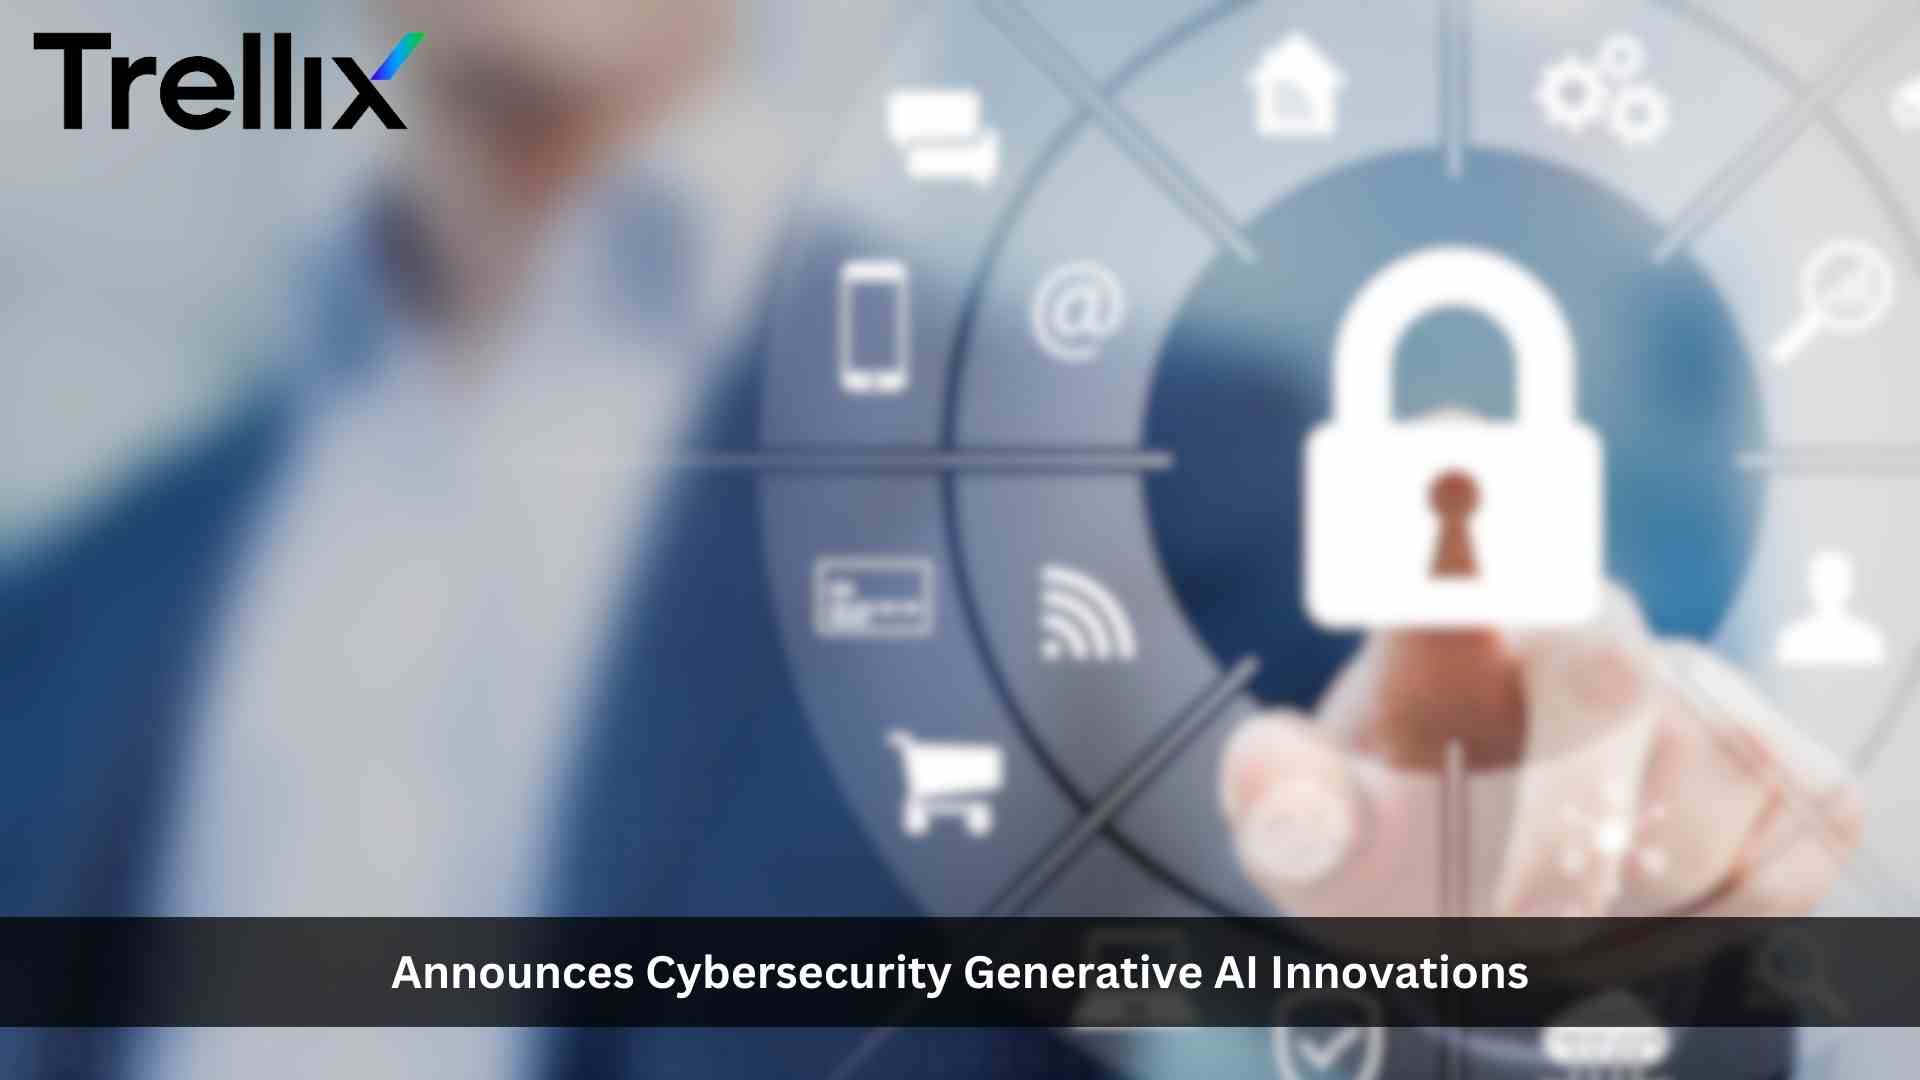 Trellix Announces Cybersecurity Generative AI Innovations Powered by Amazon Bedrock